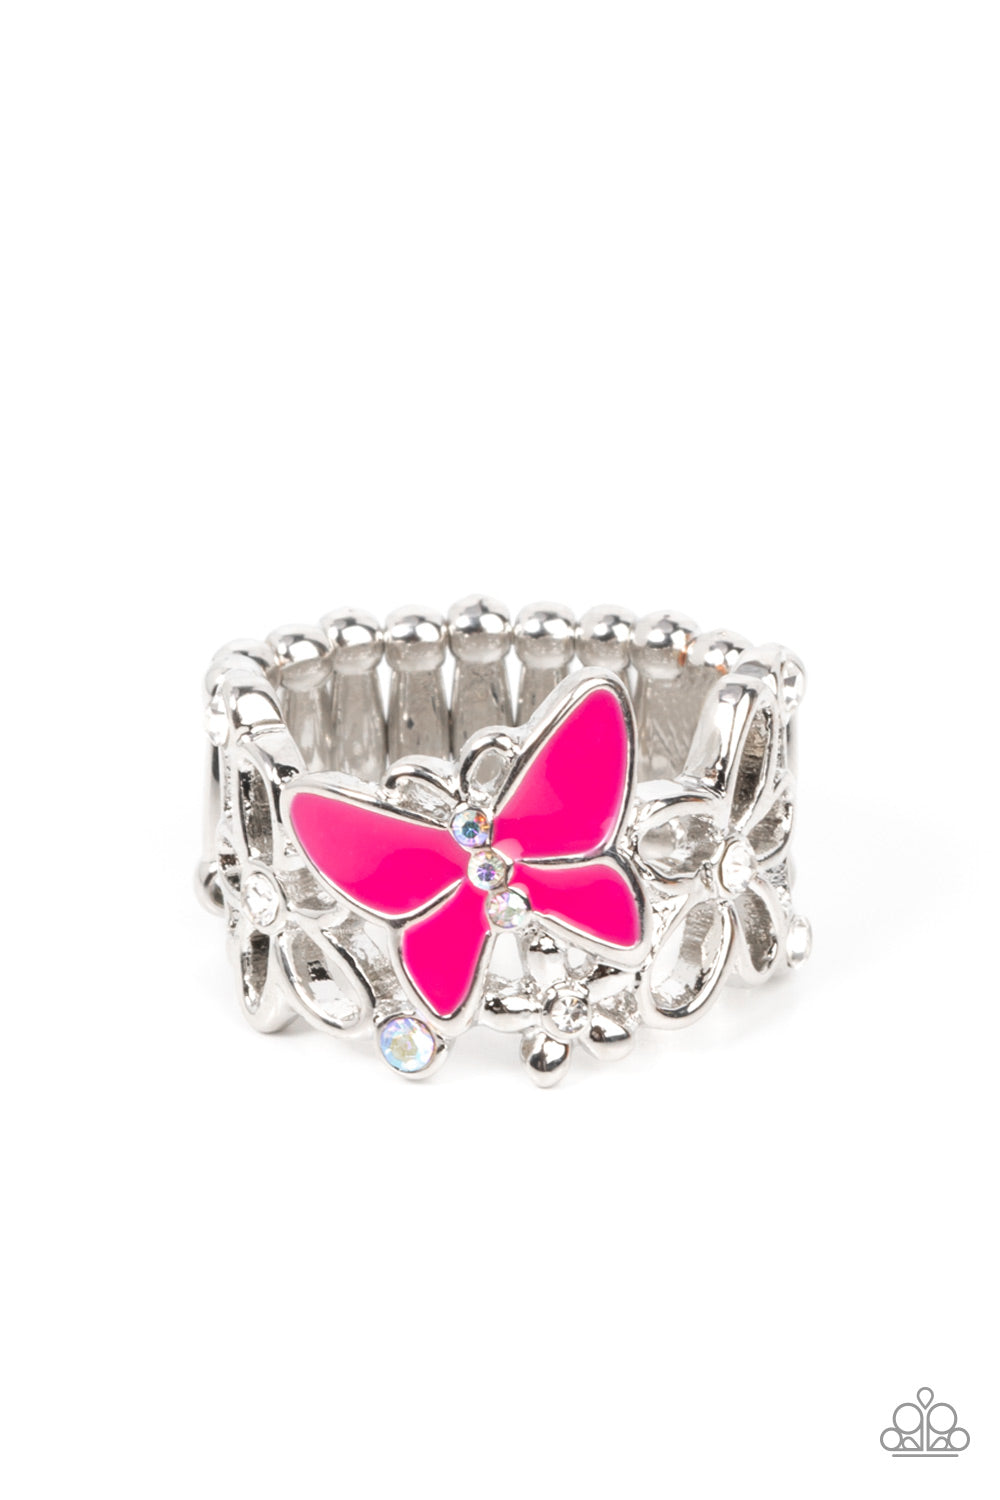 Paparazzi - All FLUTTERED Up - Pink Ring - Alies Bling Bar